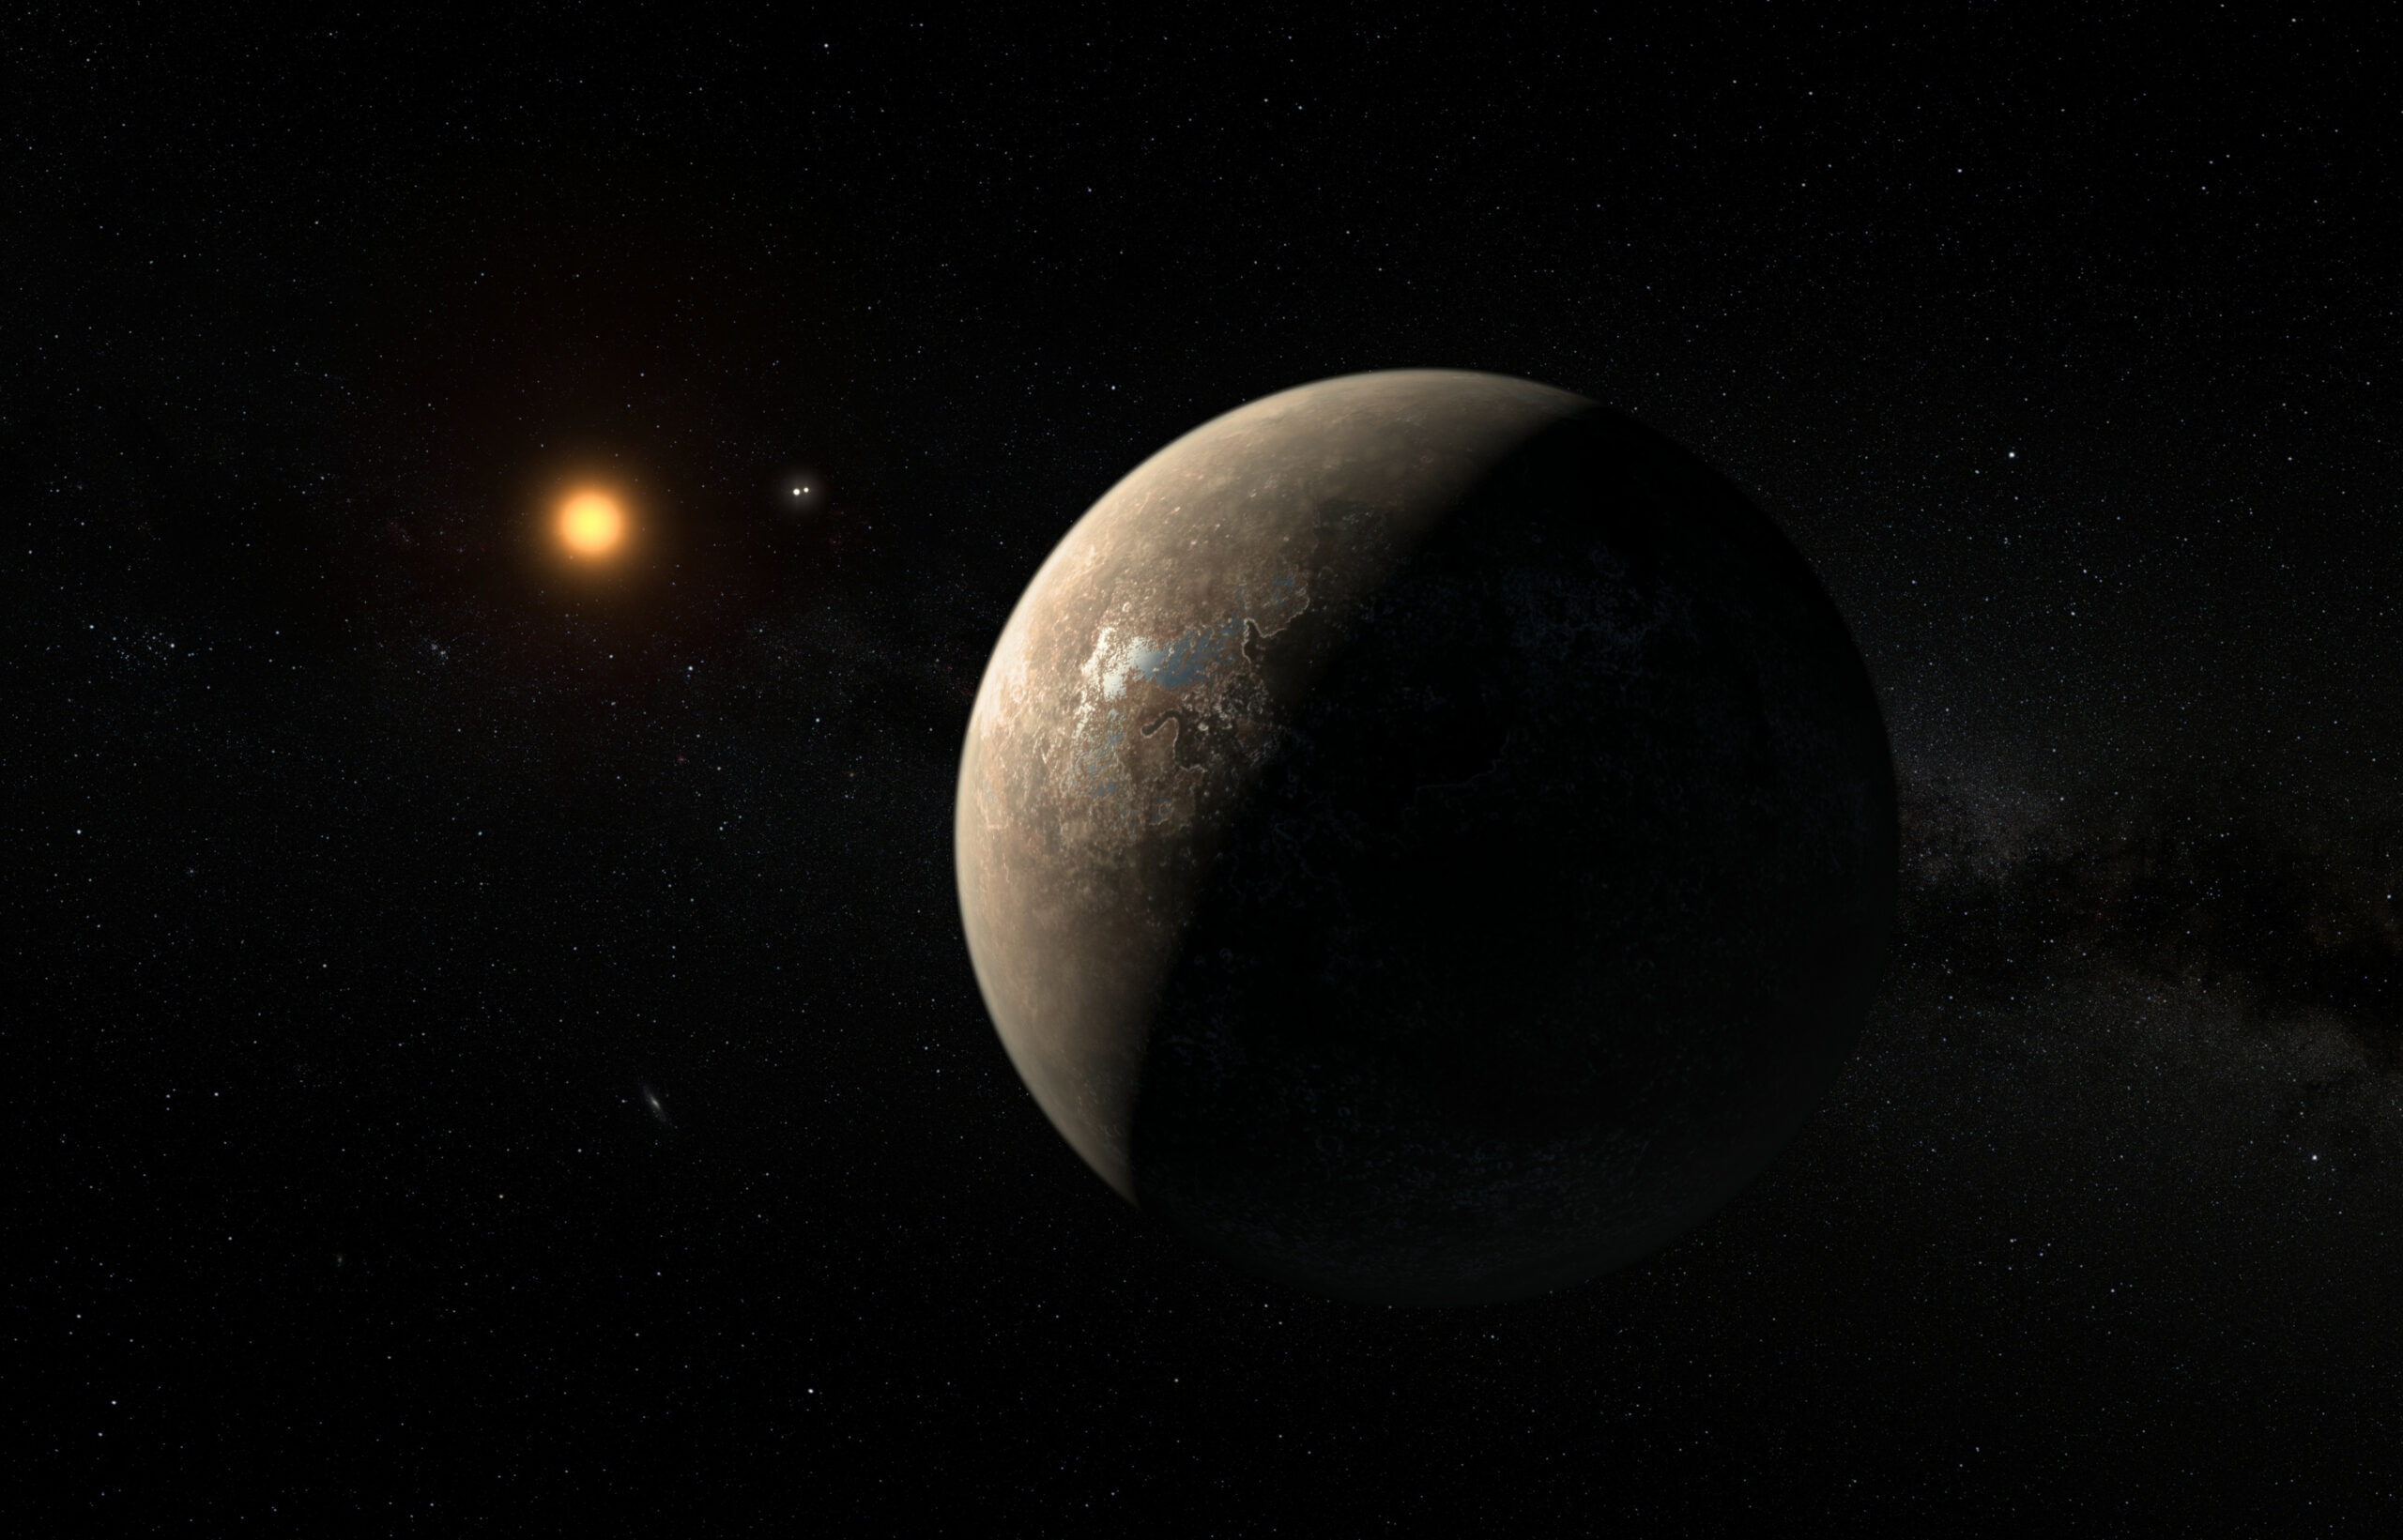 NASA’s official exoplanet tally has passed 5,000 worlds